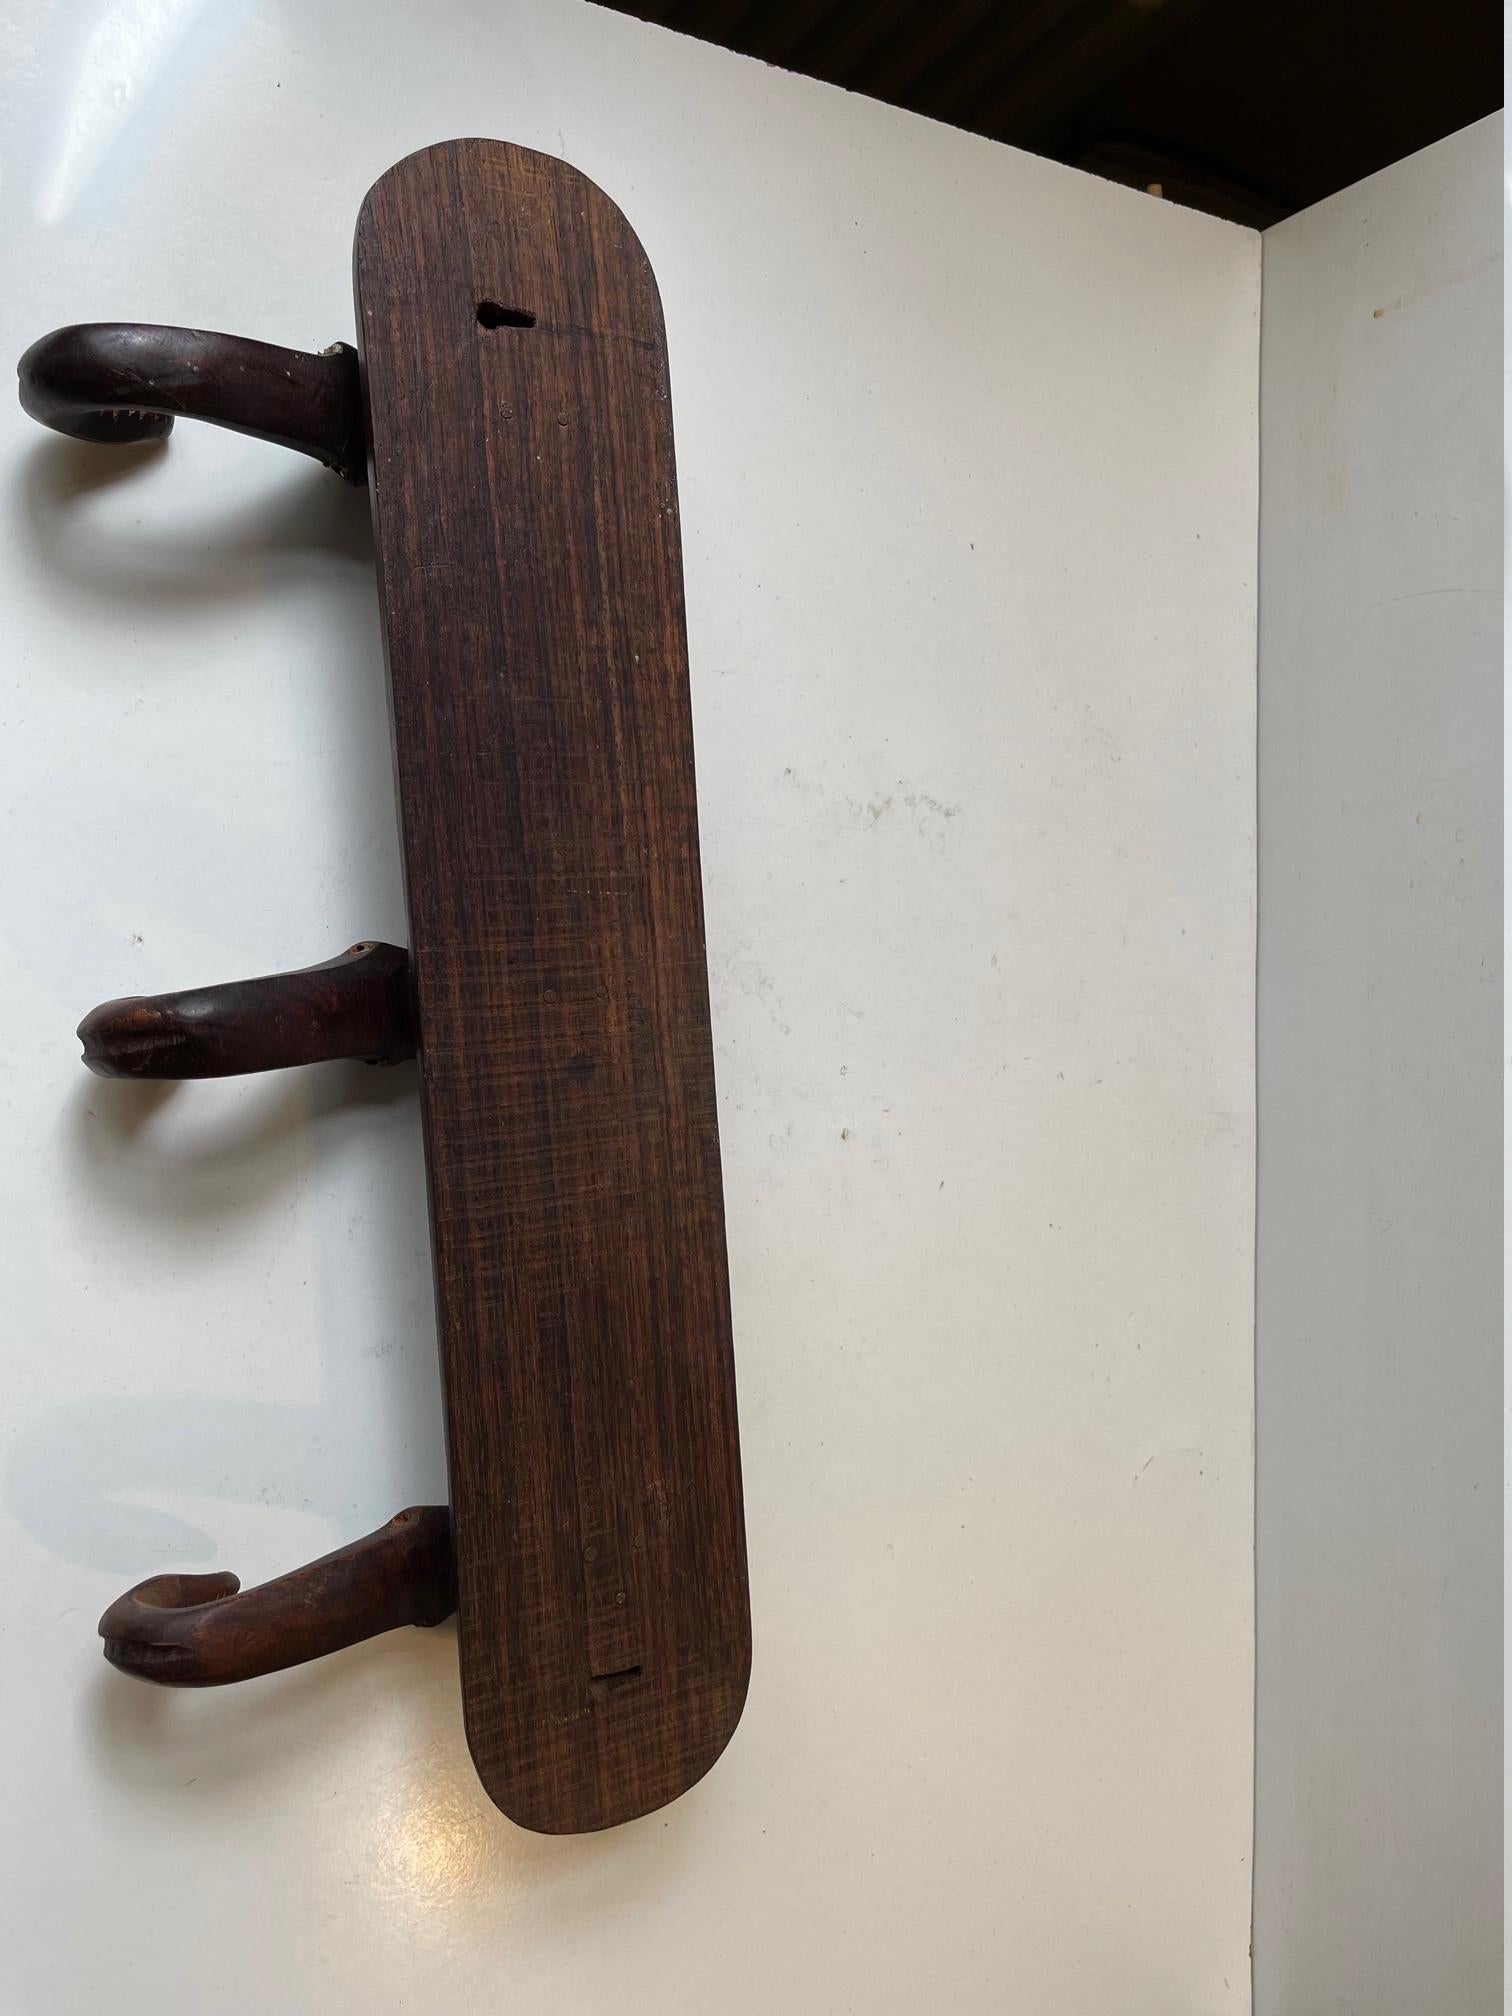 Hand-Carved Elephant Coat or Towel Rack in Dark Wood, 1930s For Sale 4